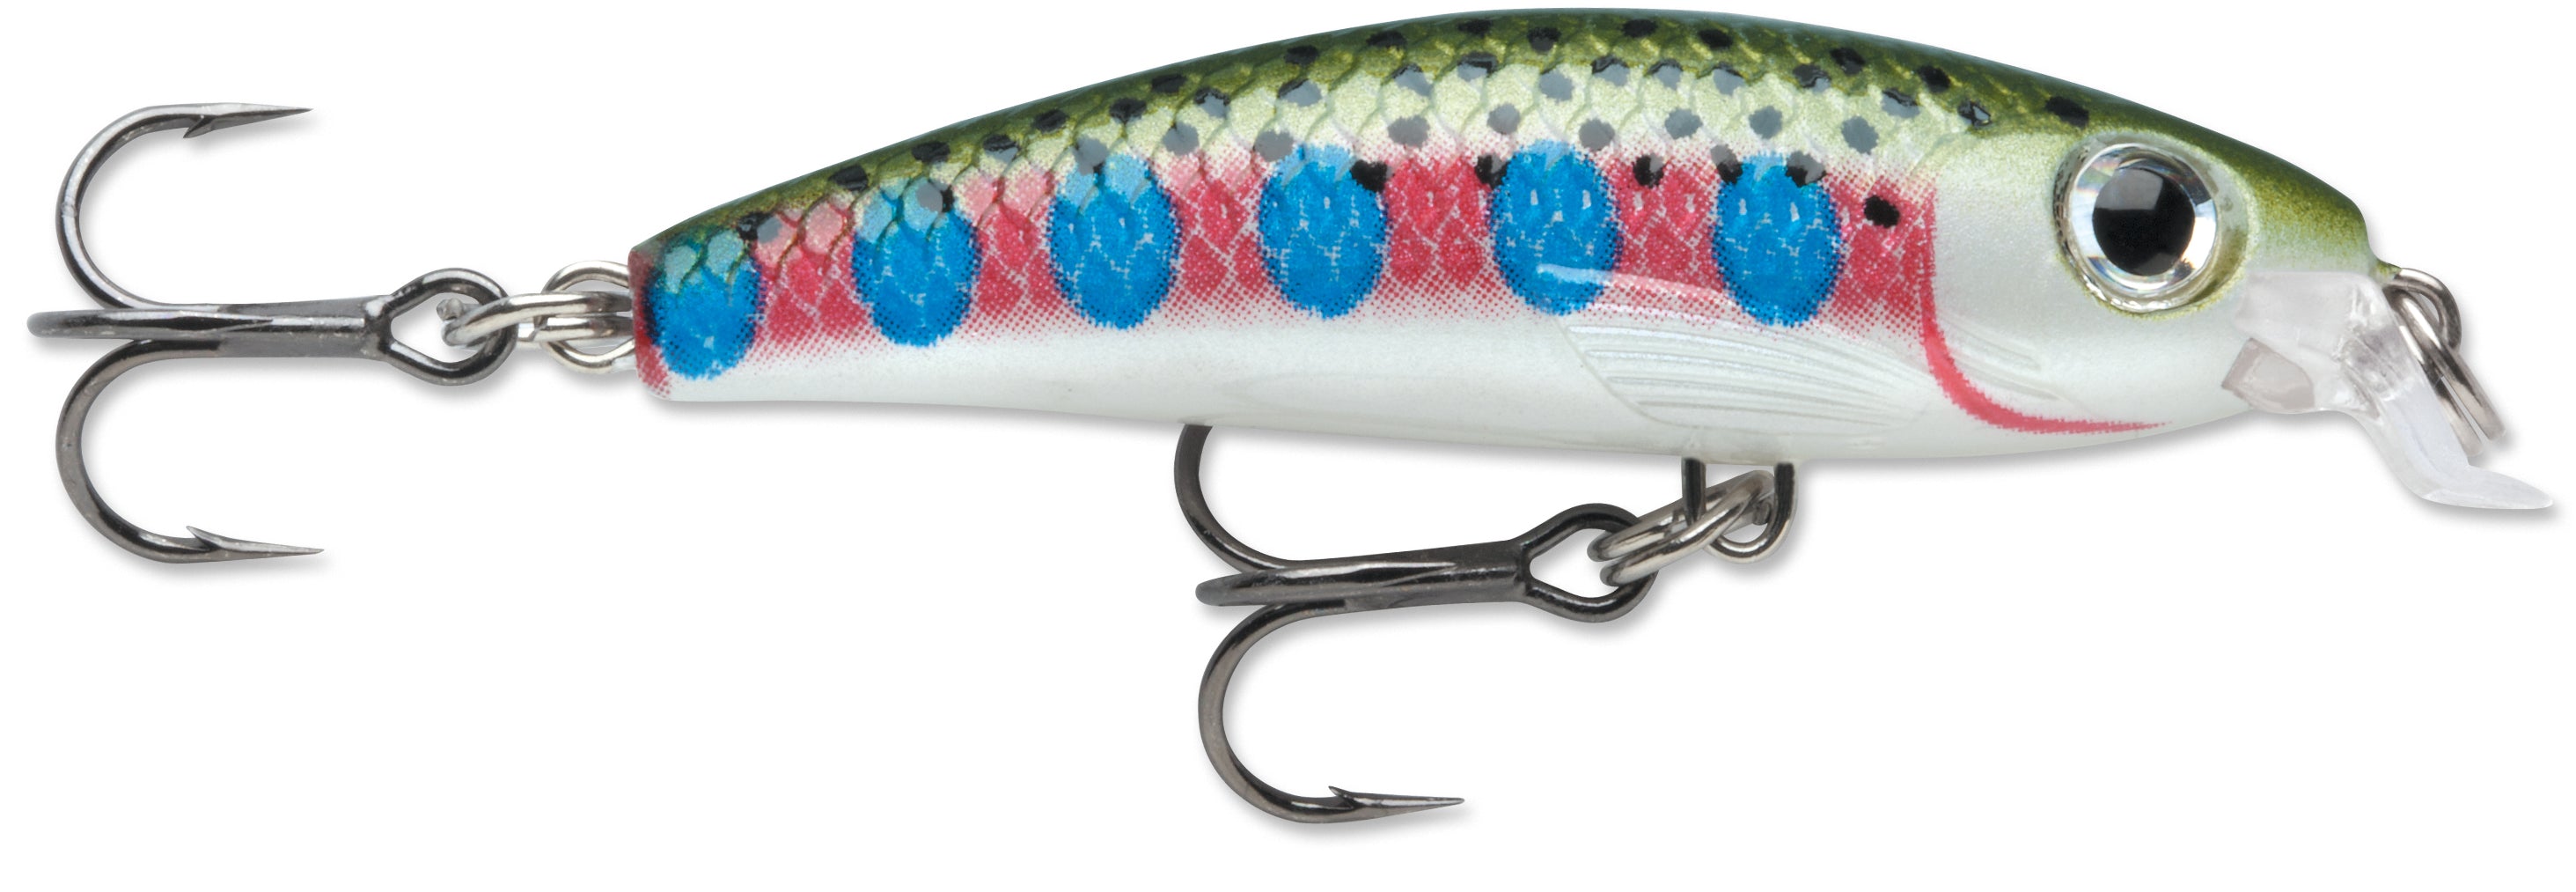 Rapala Ultra Light Minnow Fishing Lures - Material Freshwater Body